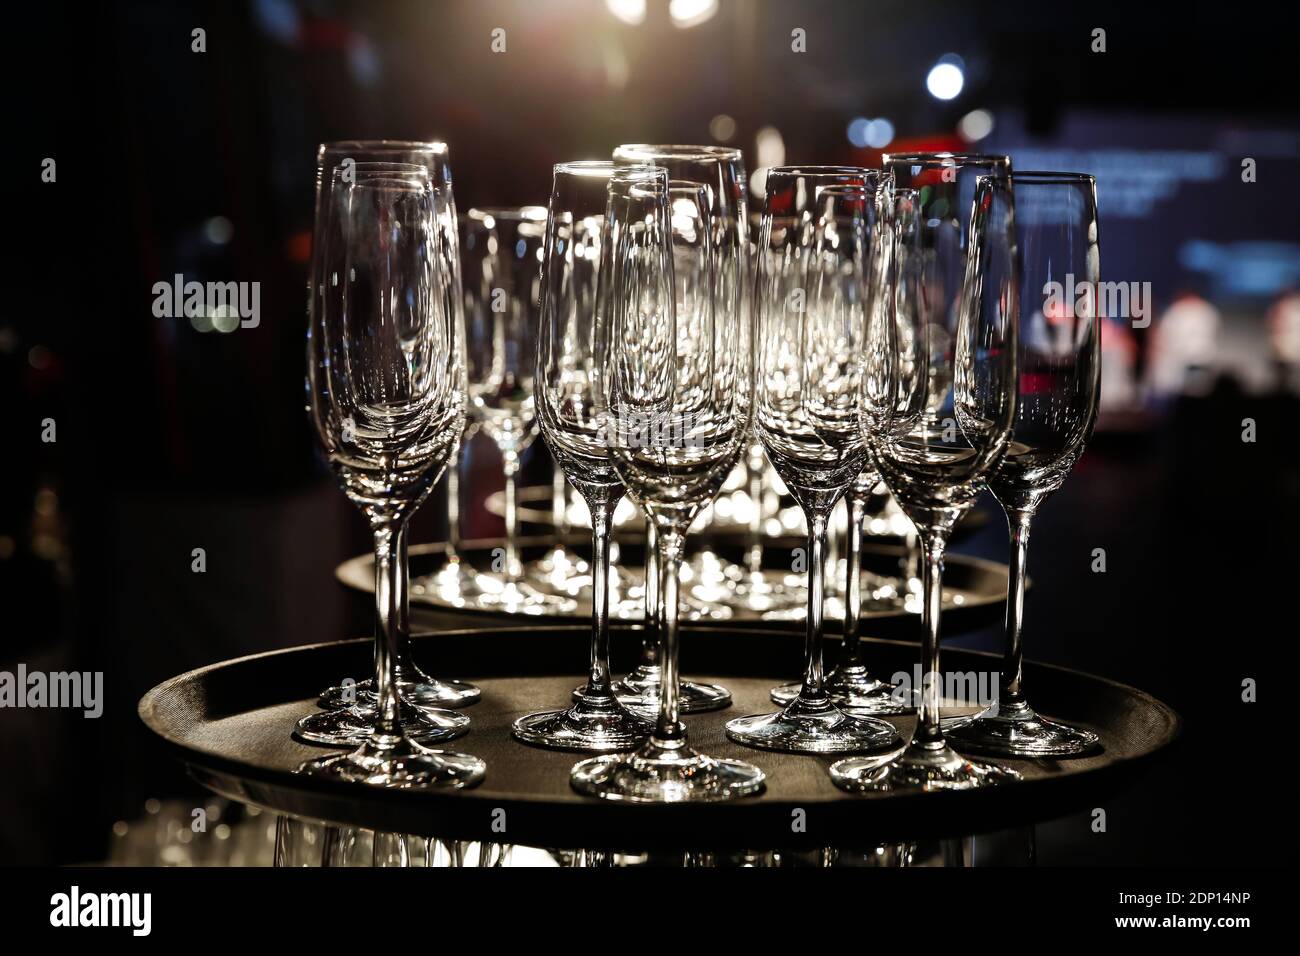 https://c8.alamy.com/comp/2DP14NP/empty-champagne-glasses-on-serving-tray-2DP14NP.jpg